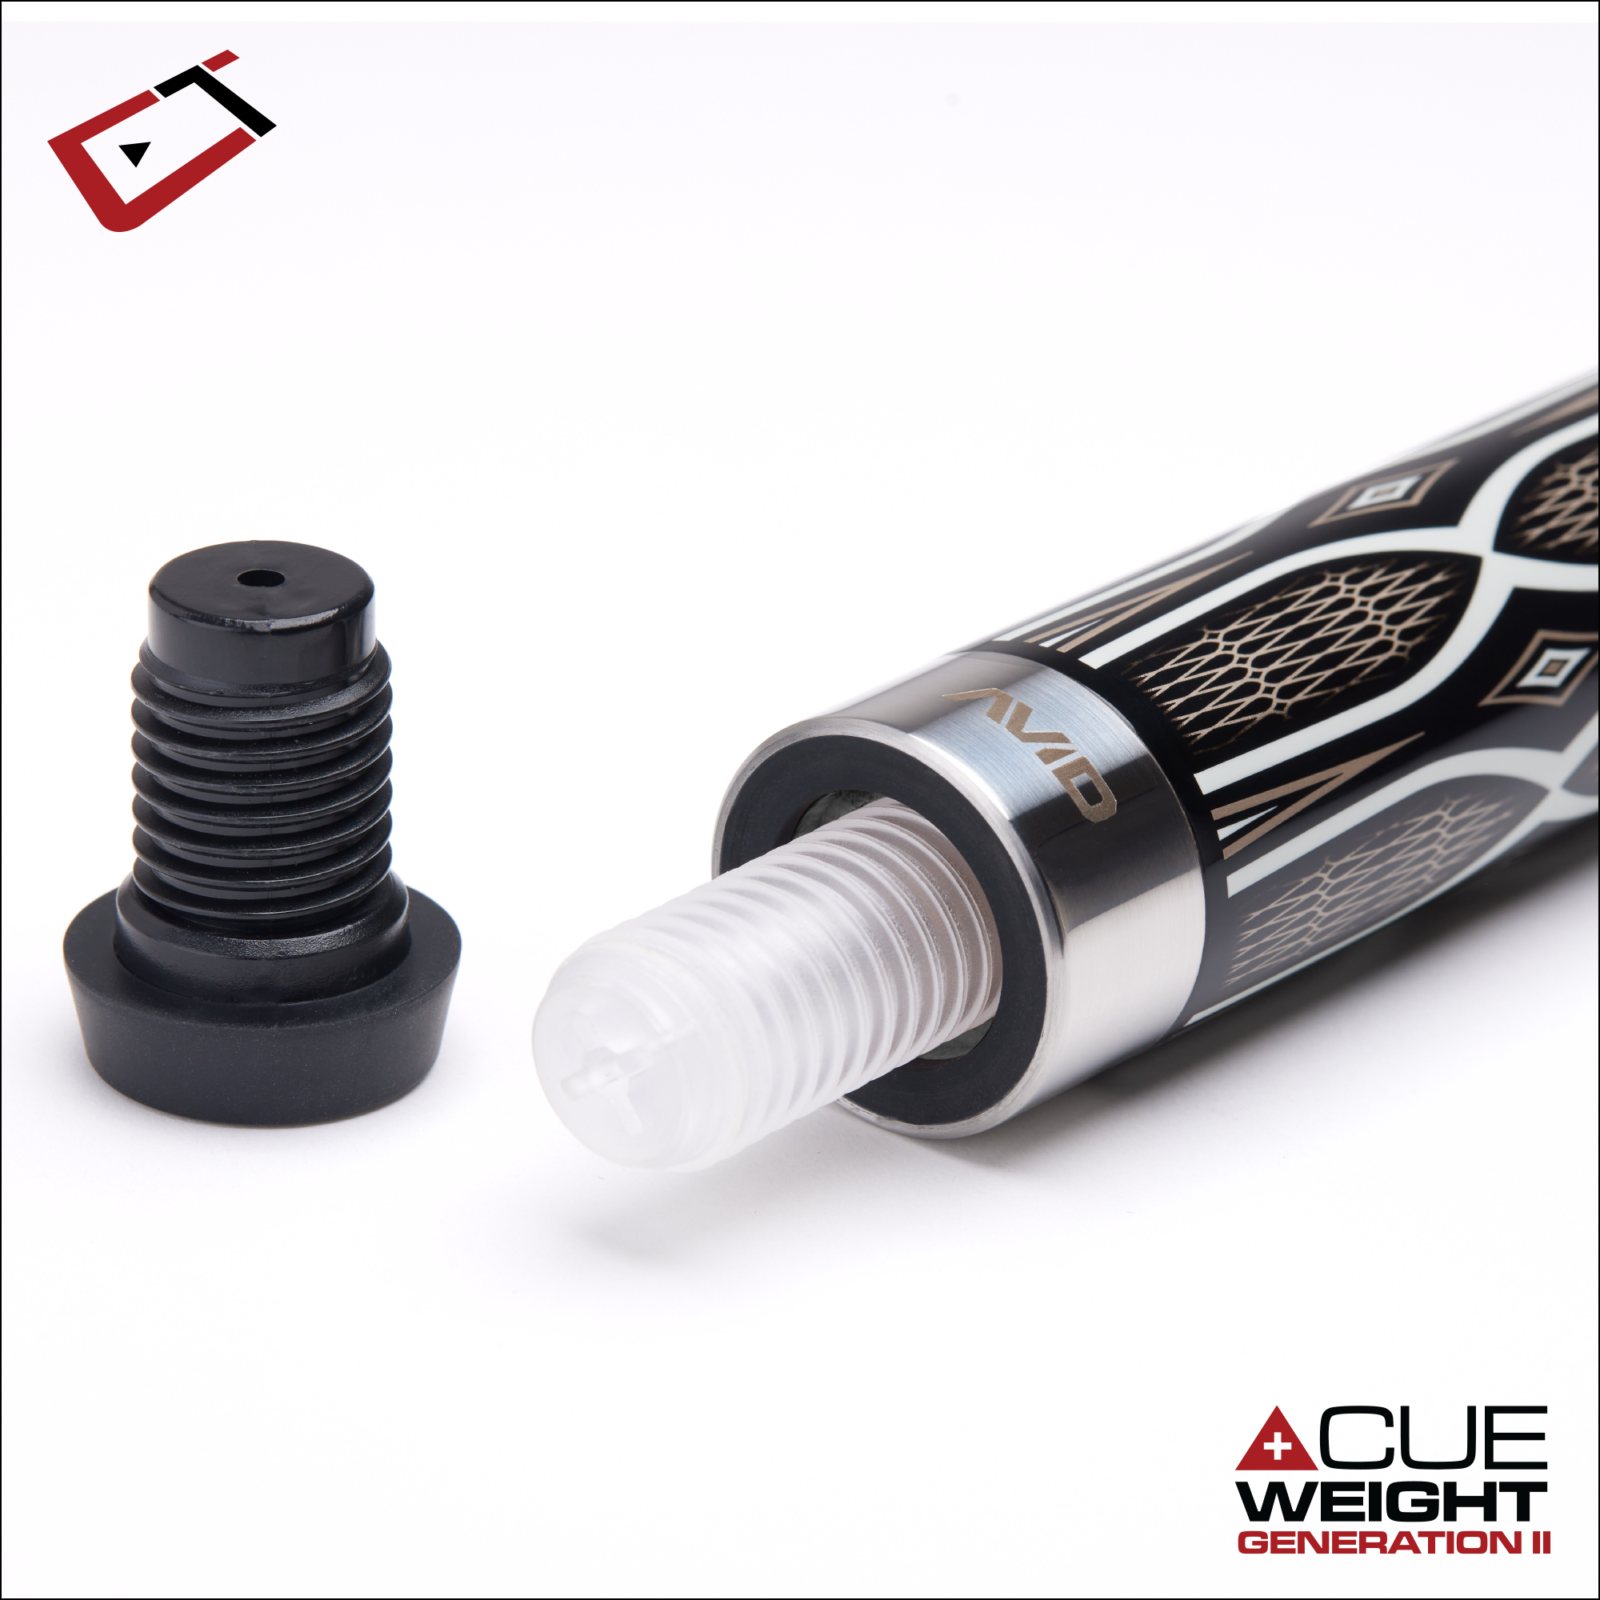 Cuetec AVID Opt-X Gold 95-380 Acueweight